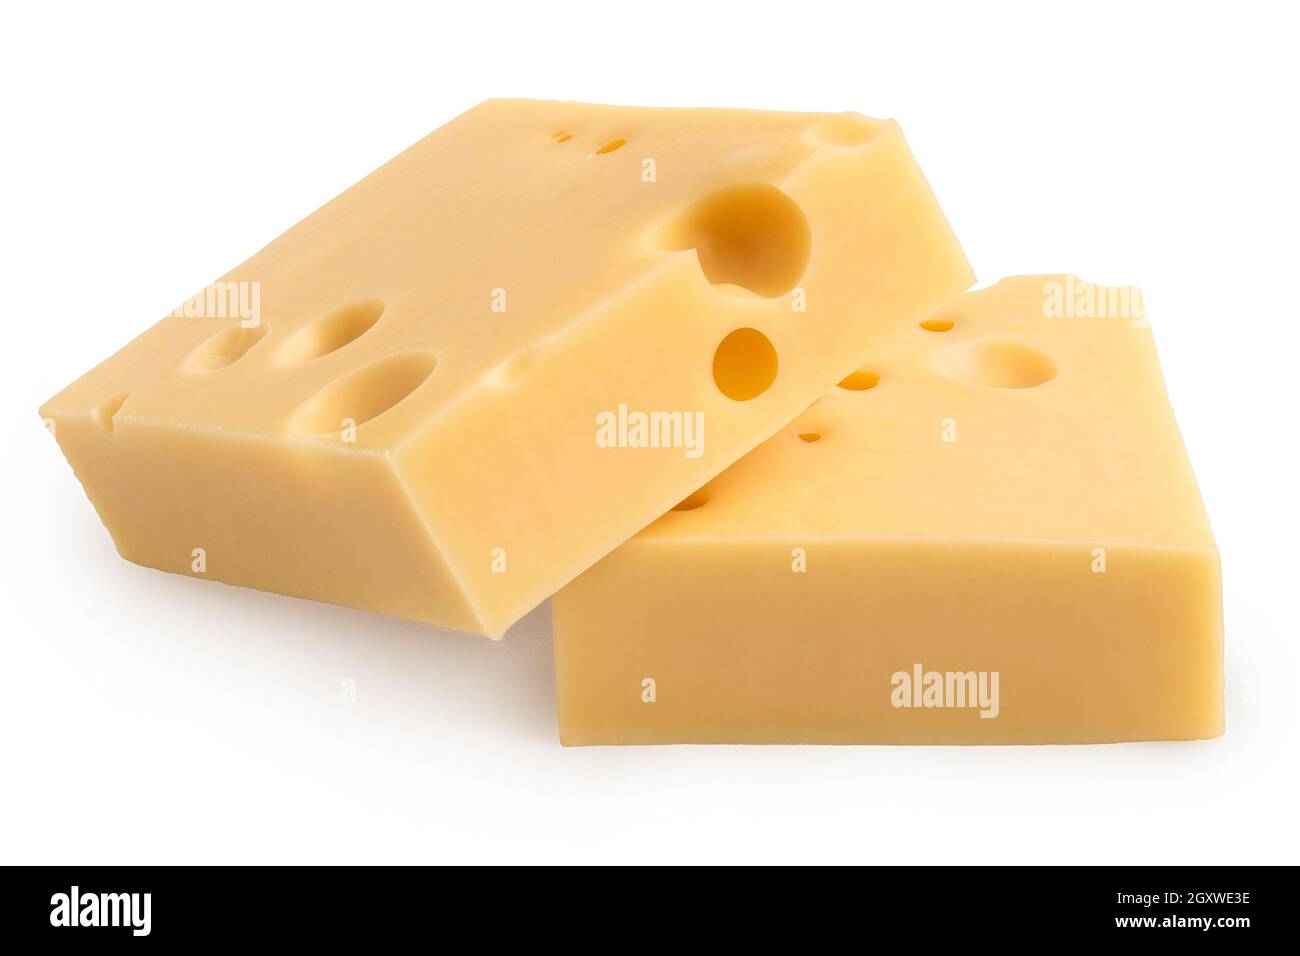 Two blocks of emmental cheese isolated on white. Stock Photo